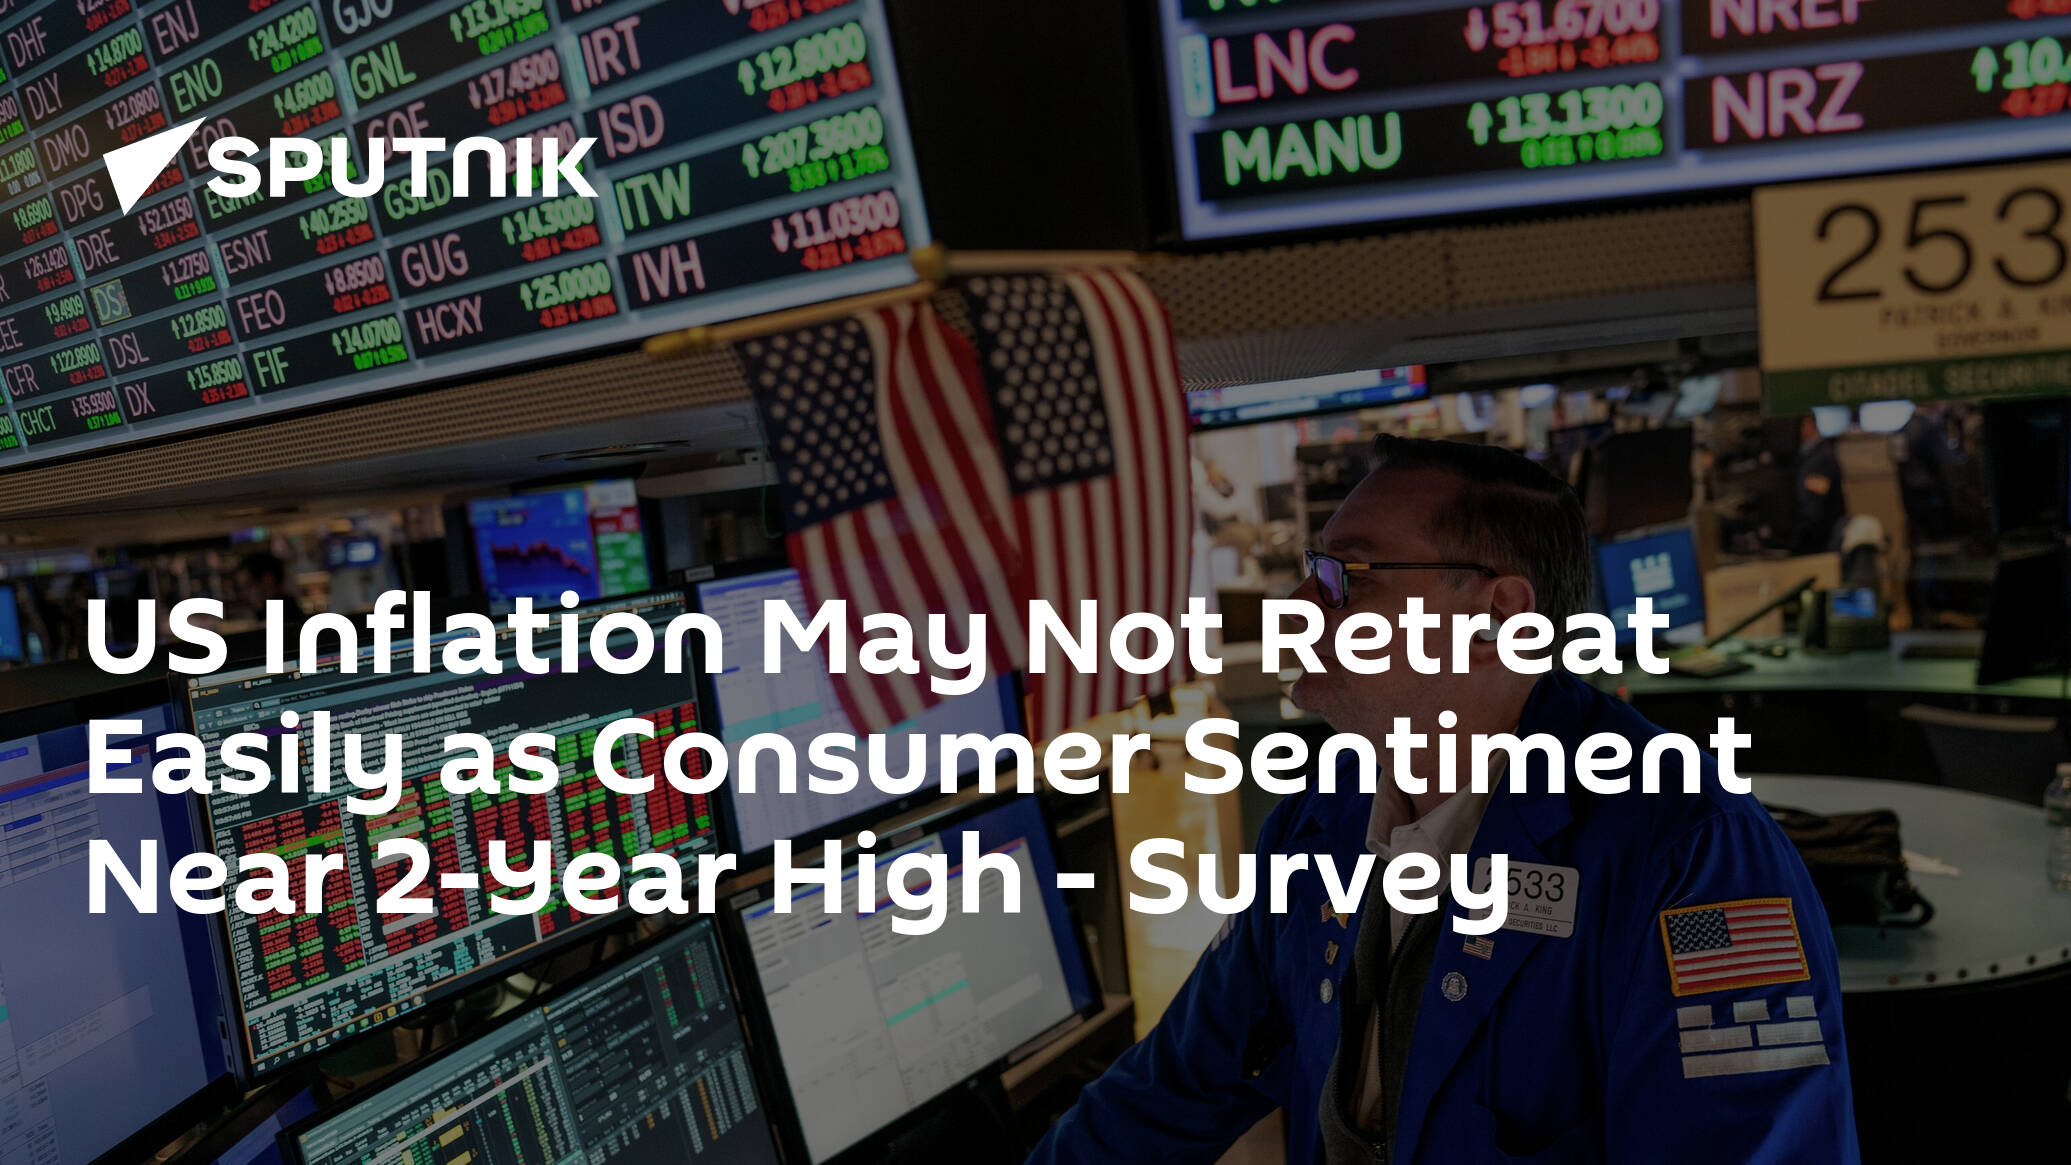 US Inflation May Not Retreat Easily as Consumer Sentiment Near 2-Year High – Survey